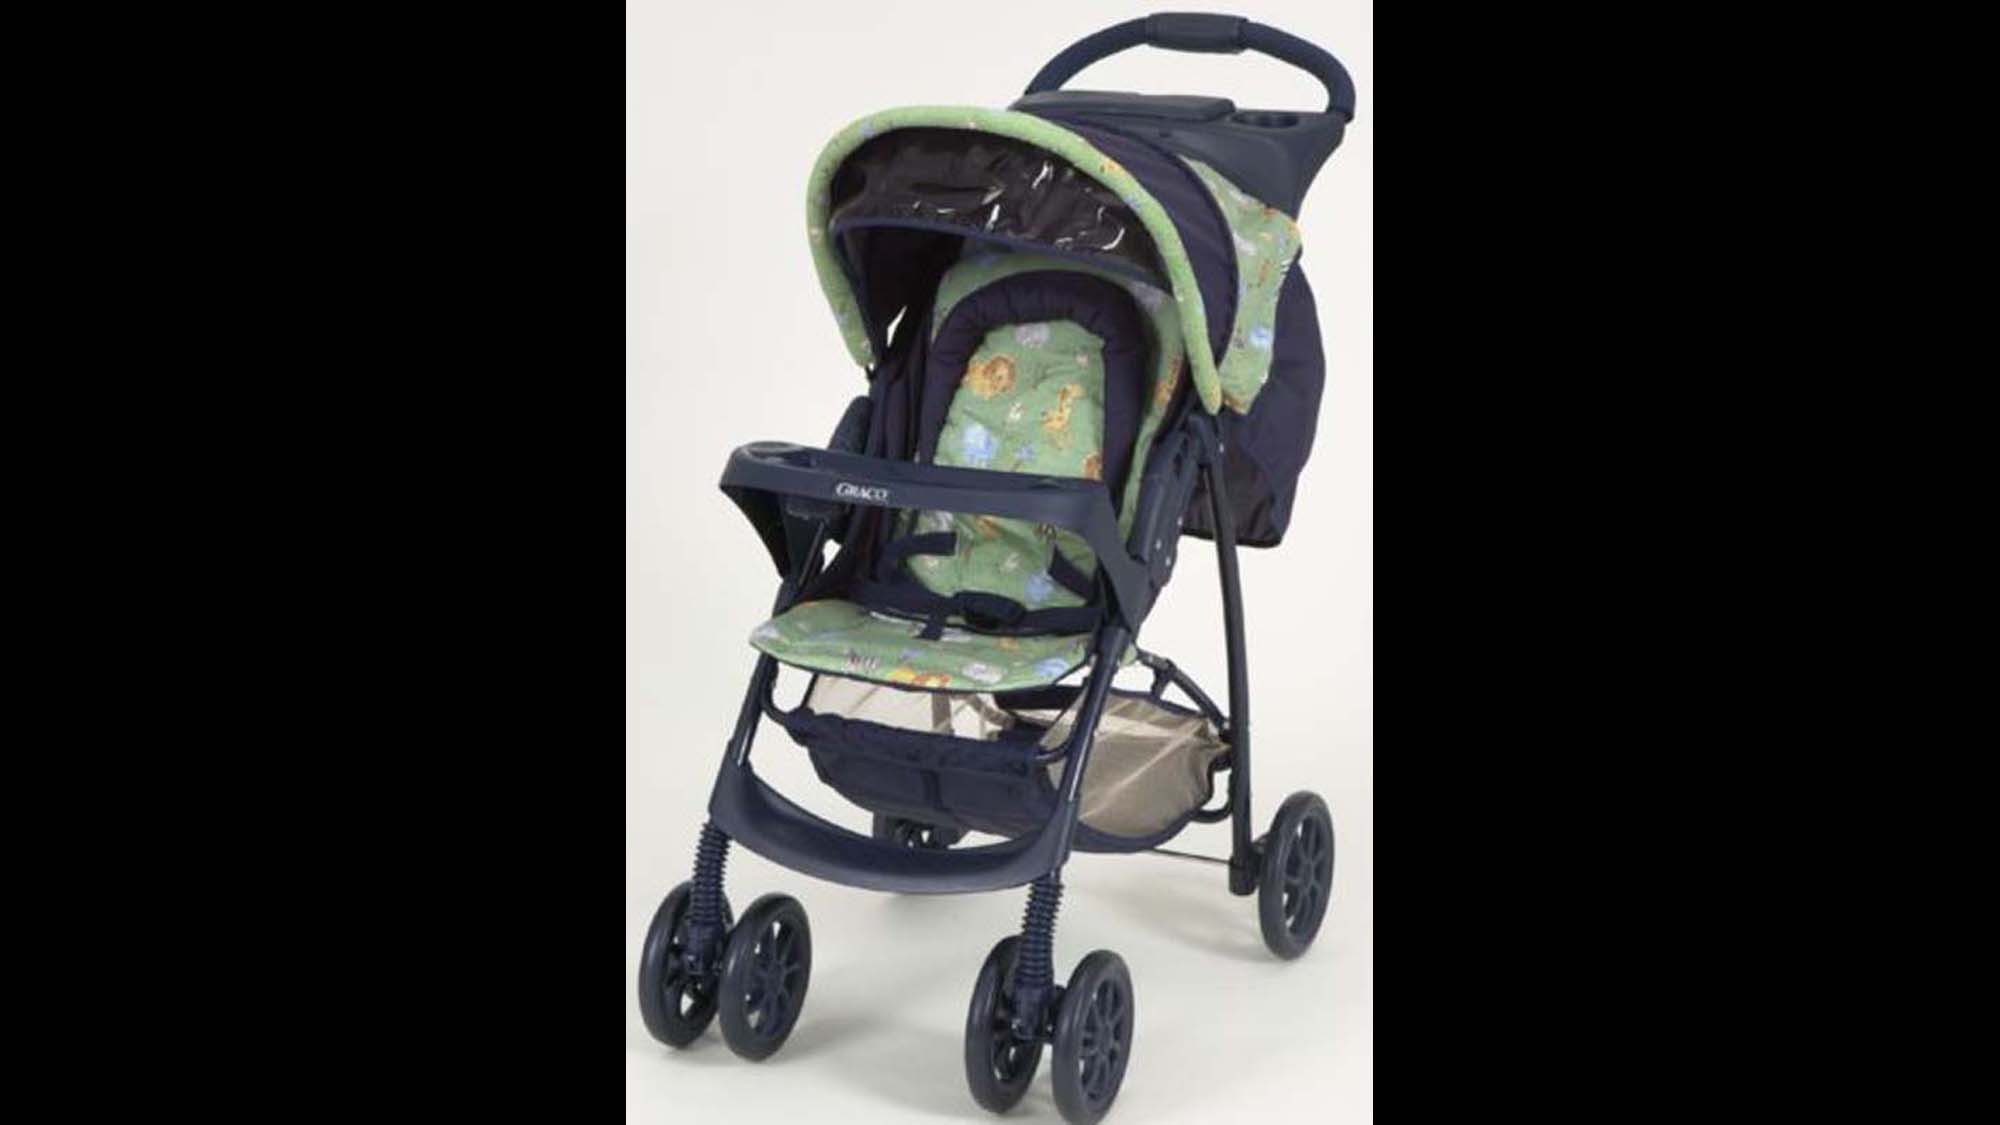 About 5 million strollers recalled after amputations | CNN